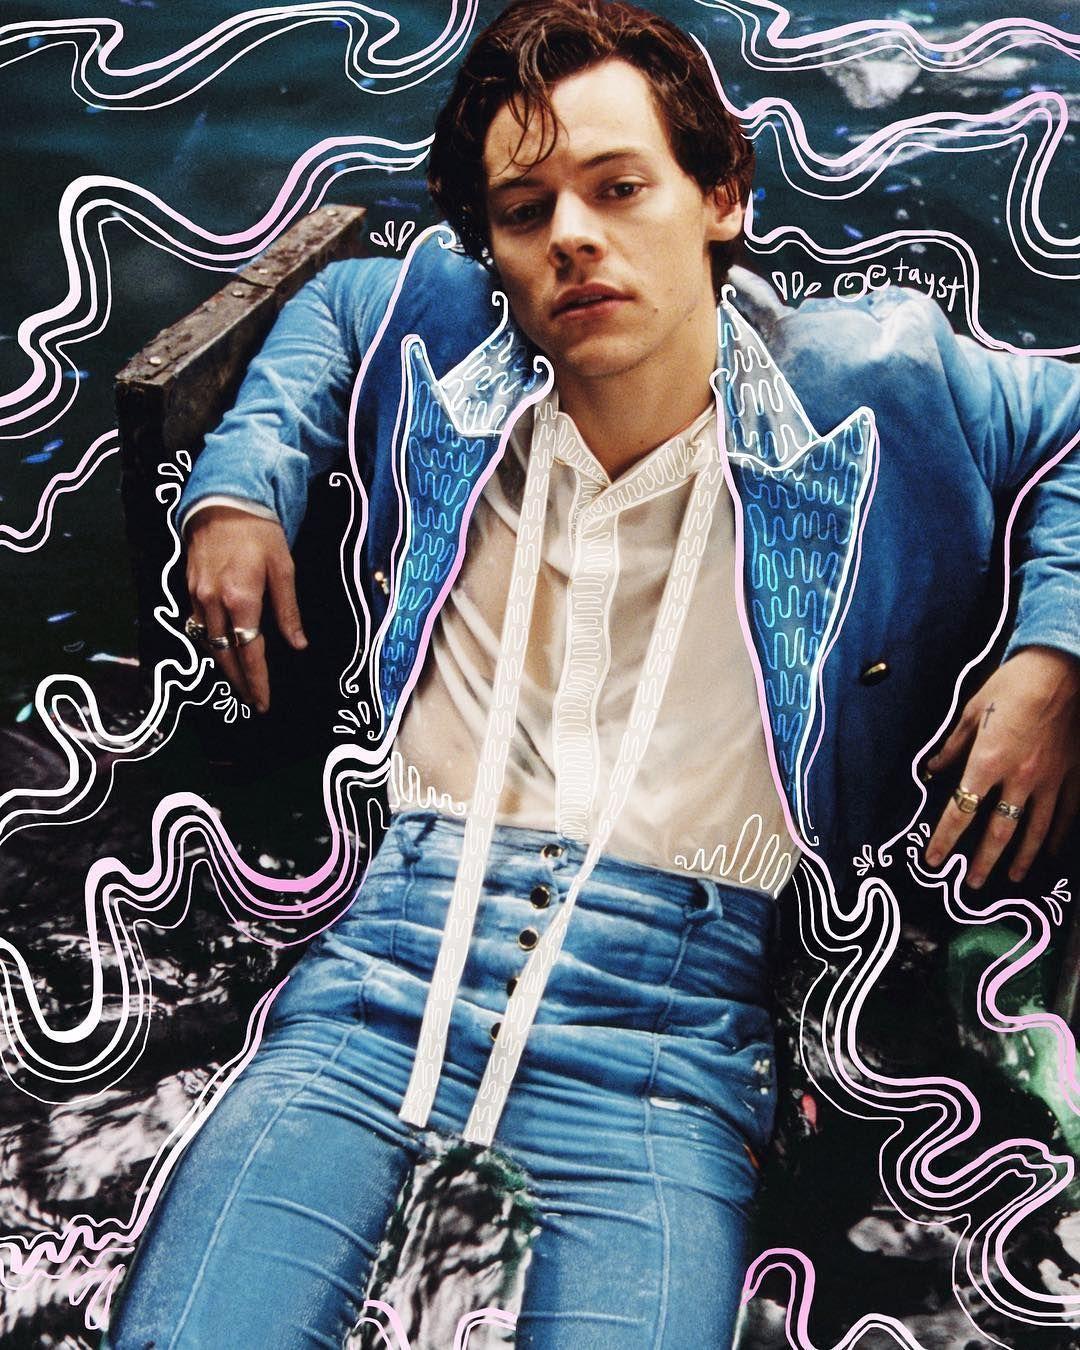 Harry Styles Album Cover Wallpapers - Top Free Harry Styles Album Cover ...